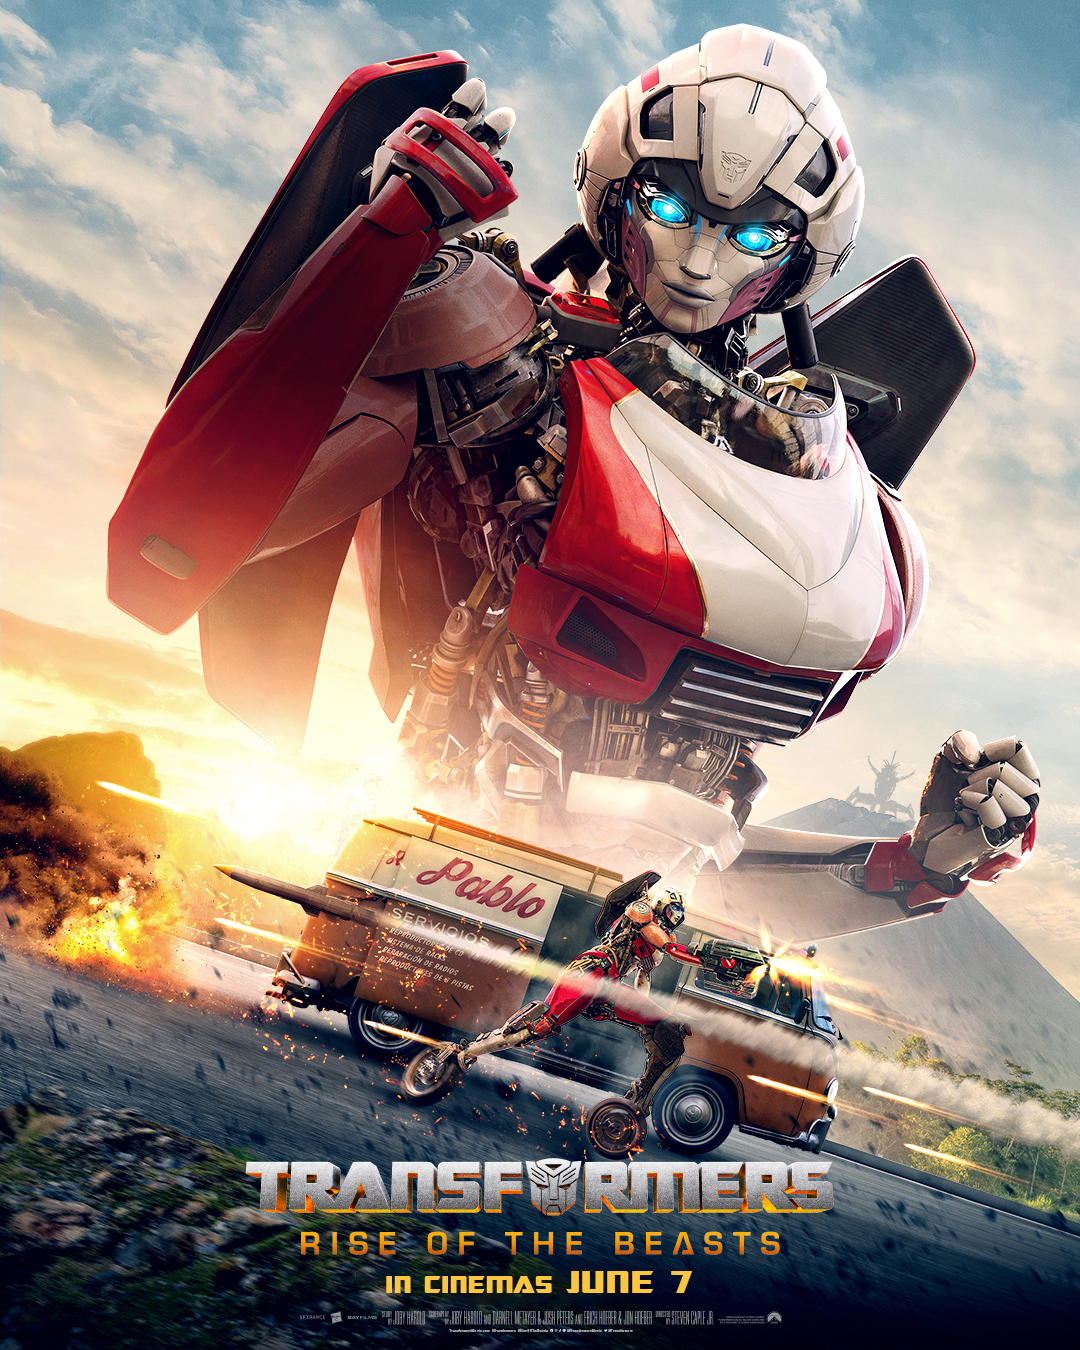 Meet the characters of “TRANSFORMERS: RISE OF THE BEASTS” 